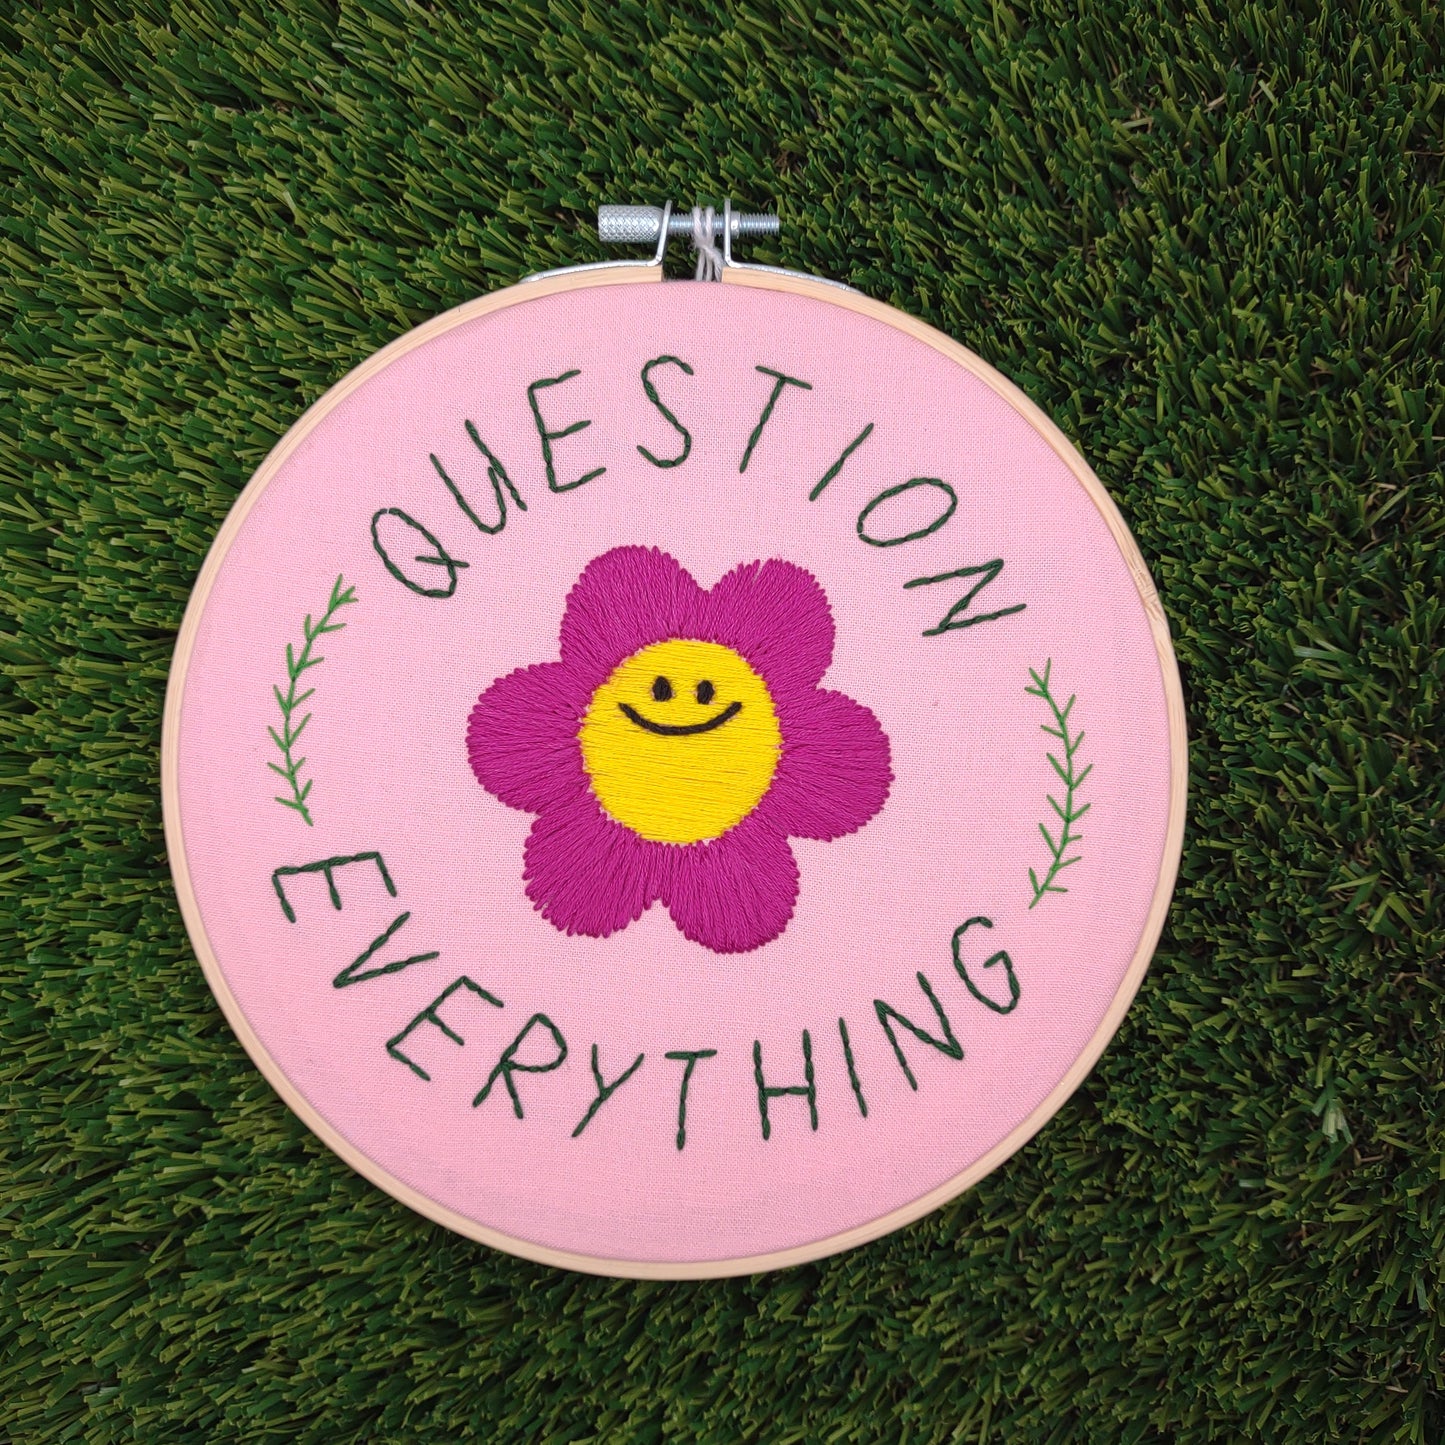 "Question Everything" Handmade Embroidery 6 inch